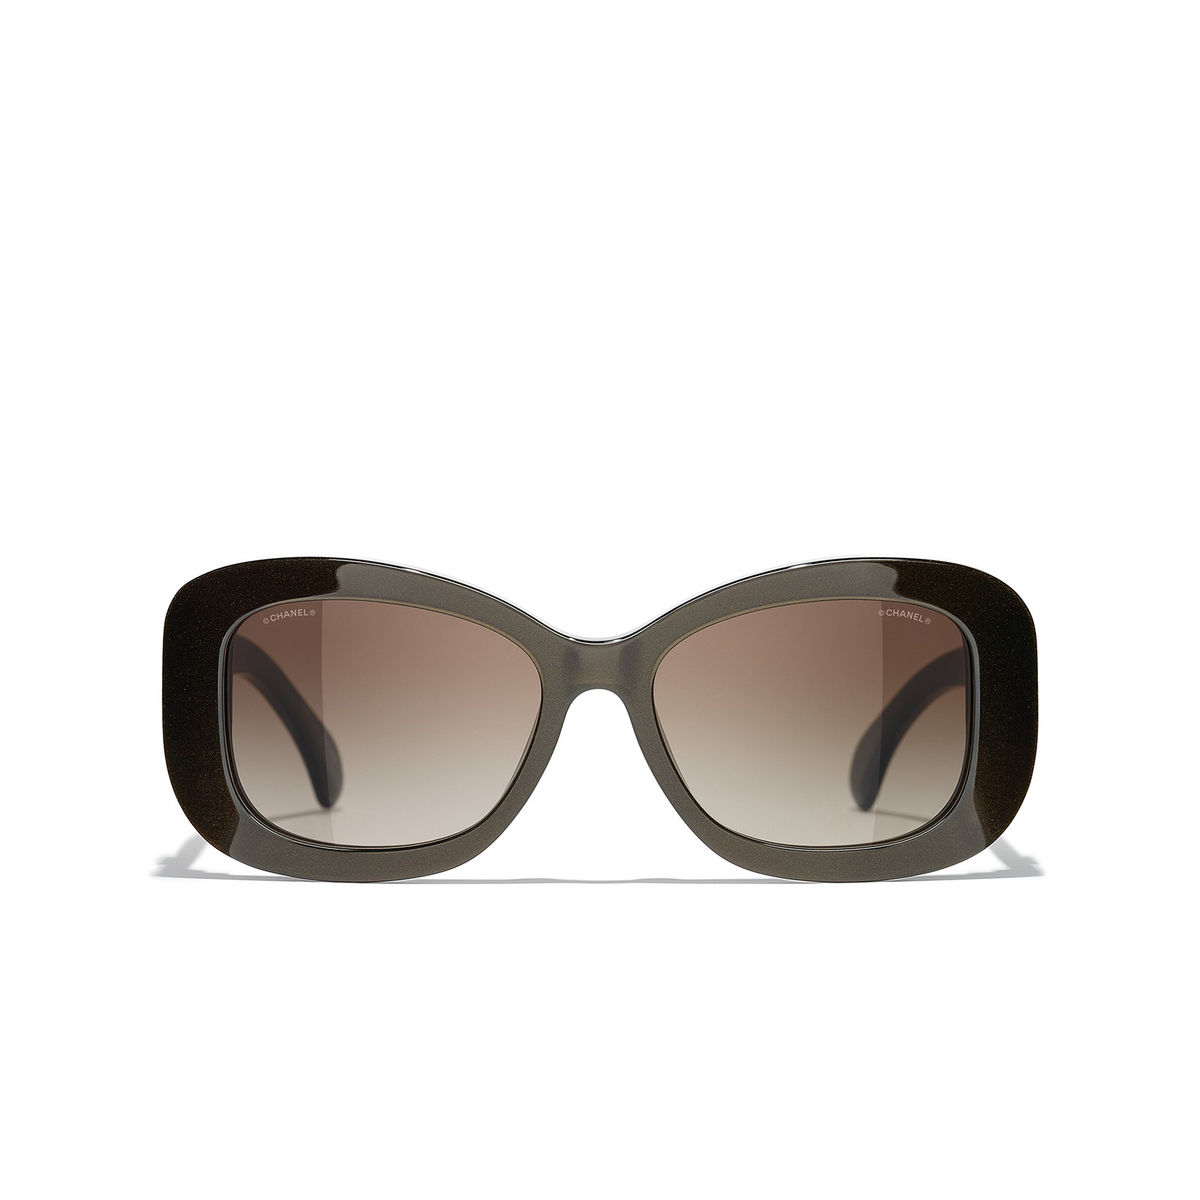 CHANEL rectangle Sunglasses 1706S5 Brown - front view